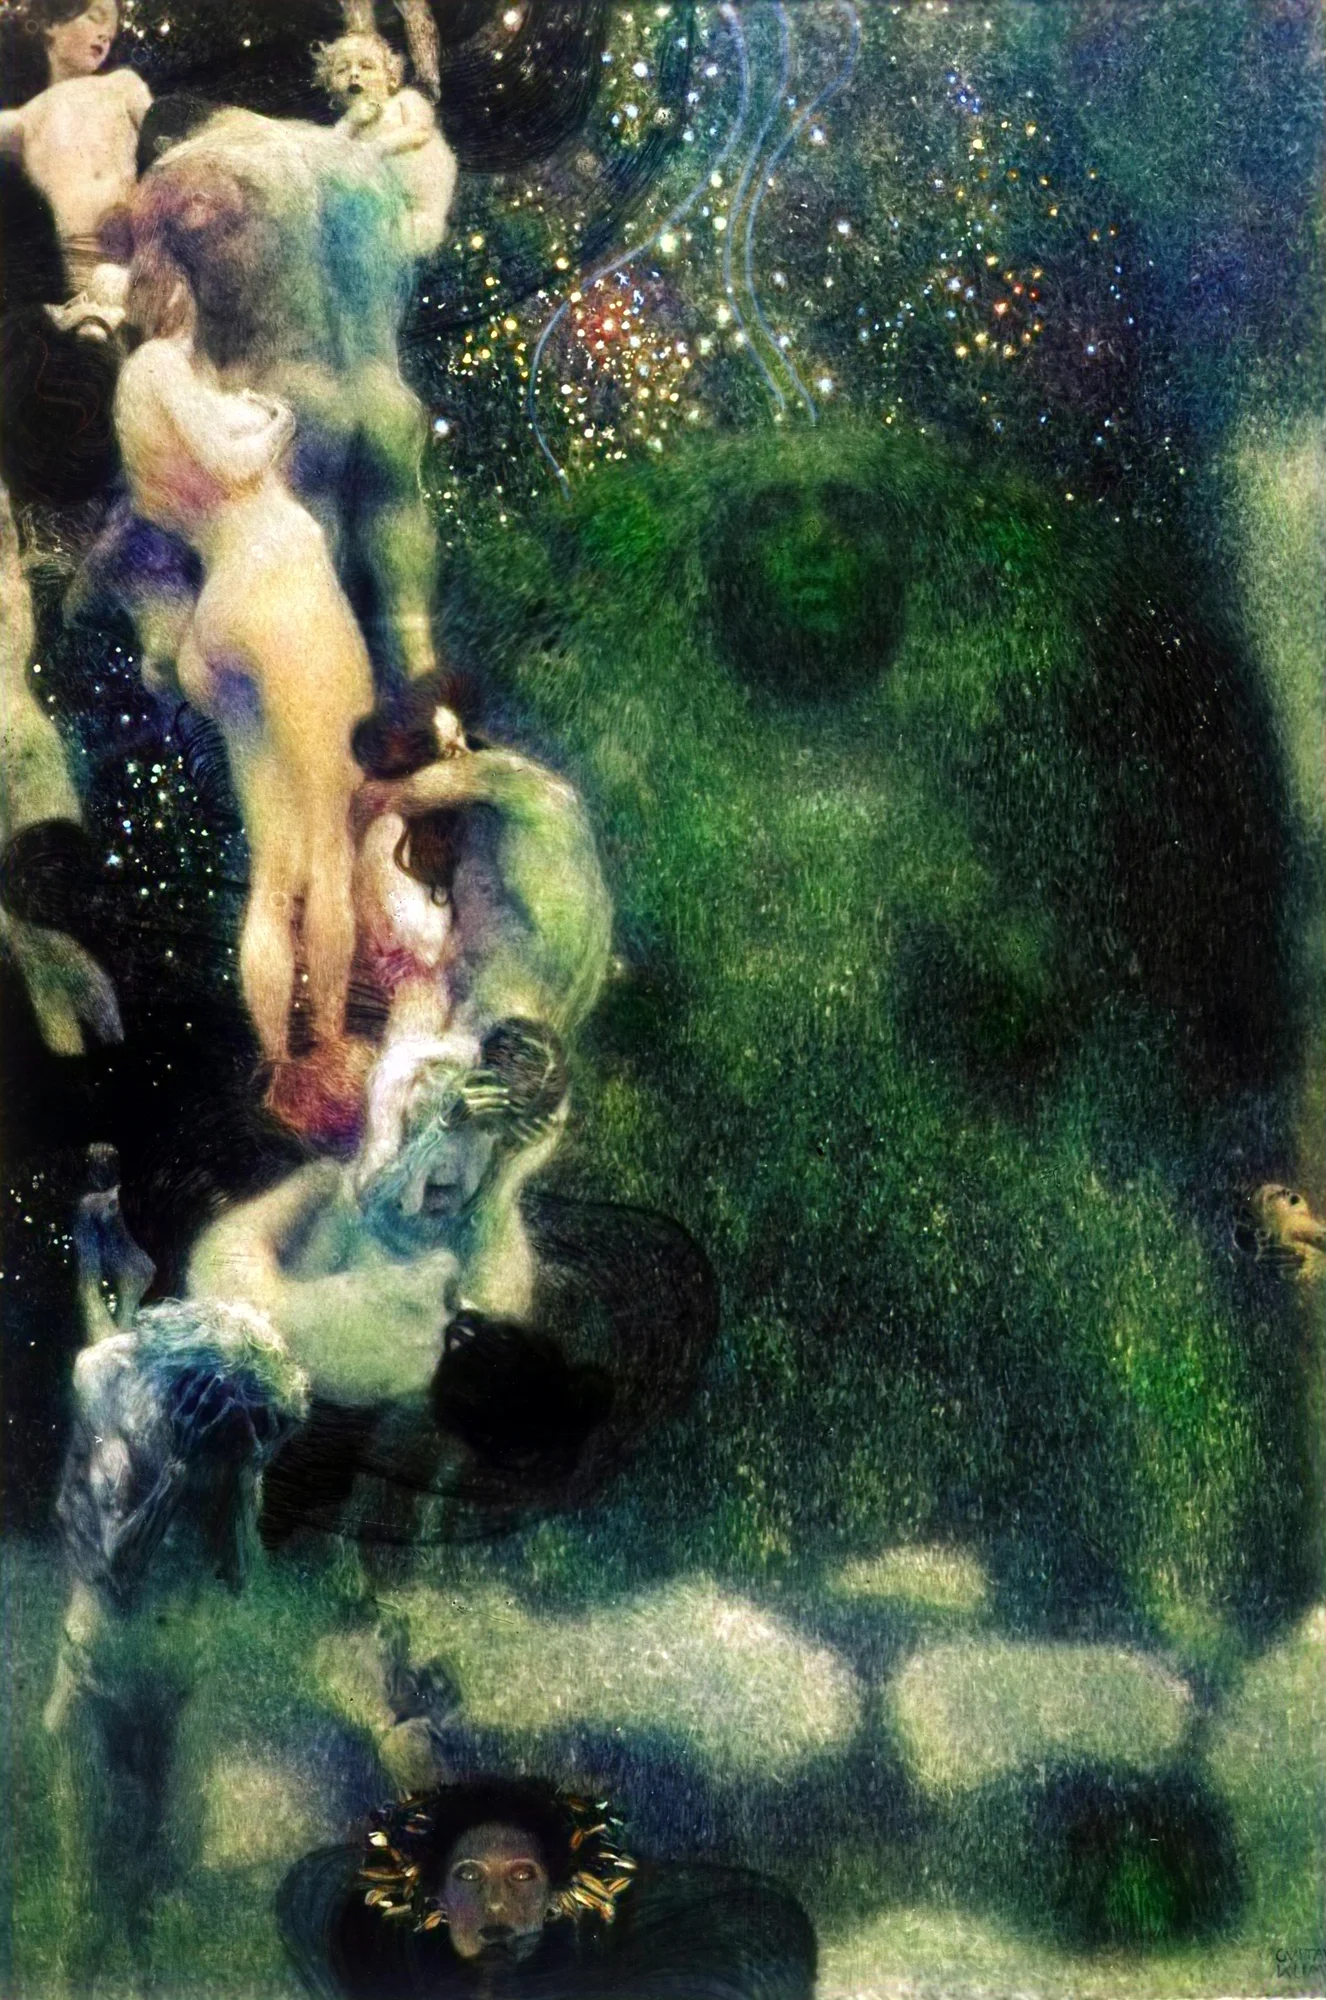 The recolored version of Klimt’s Faculty Painting “Philosophy”